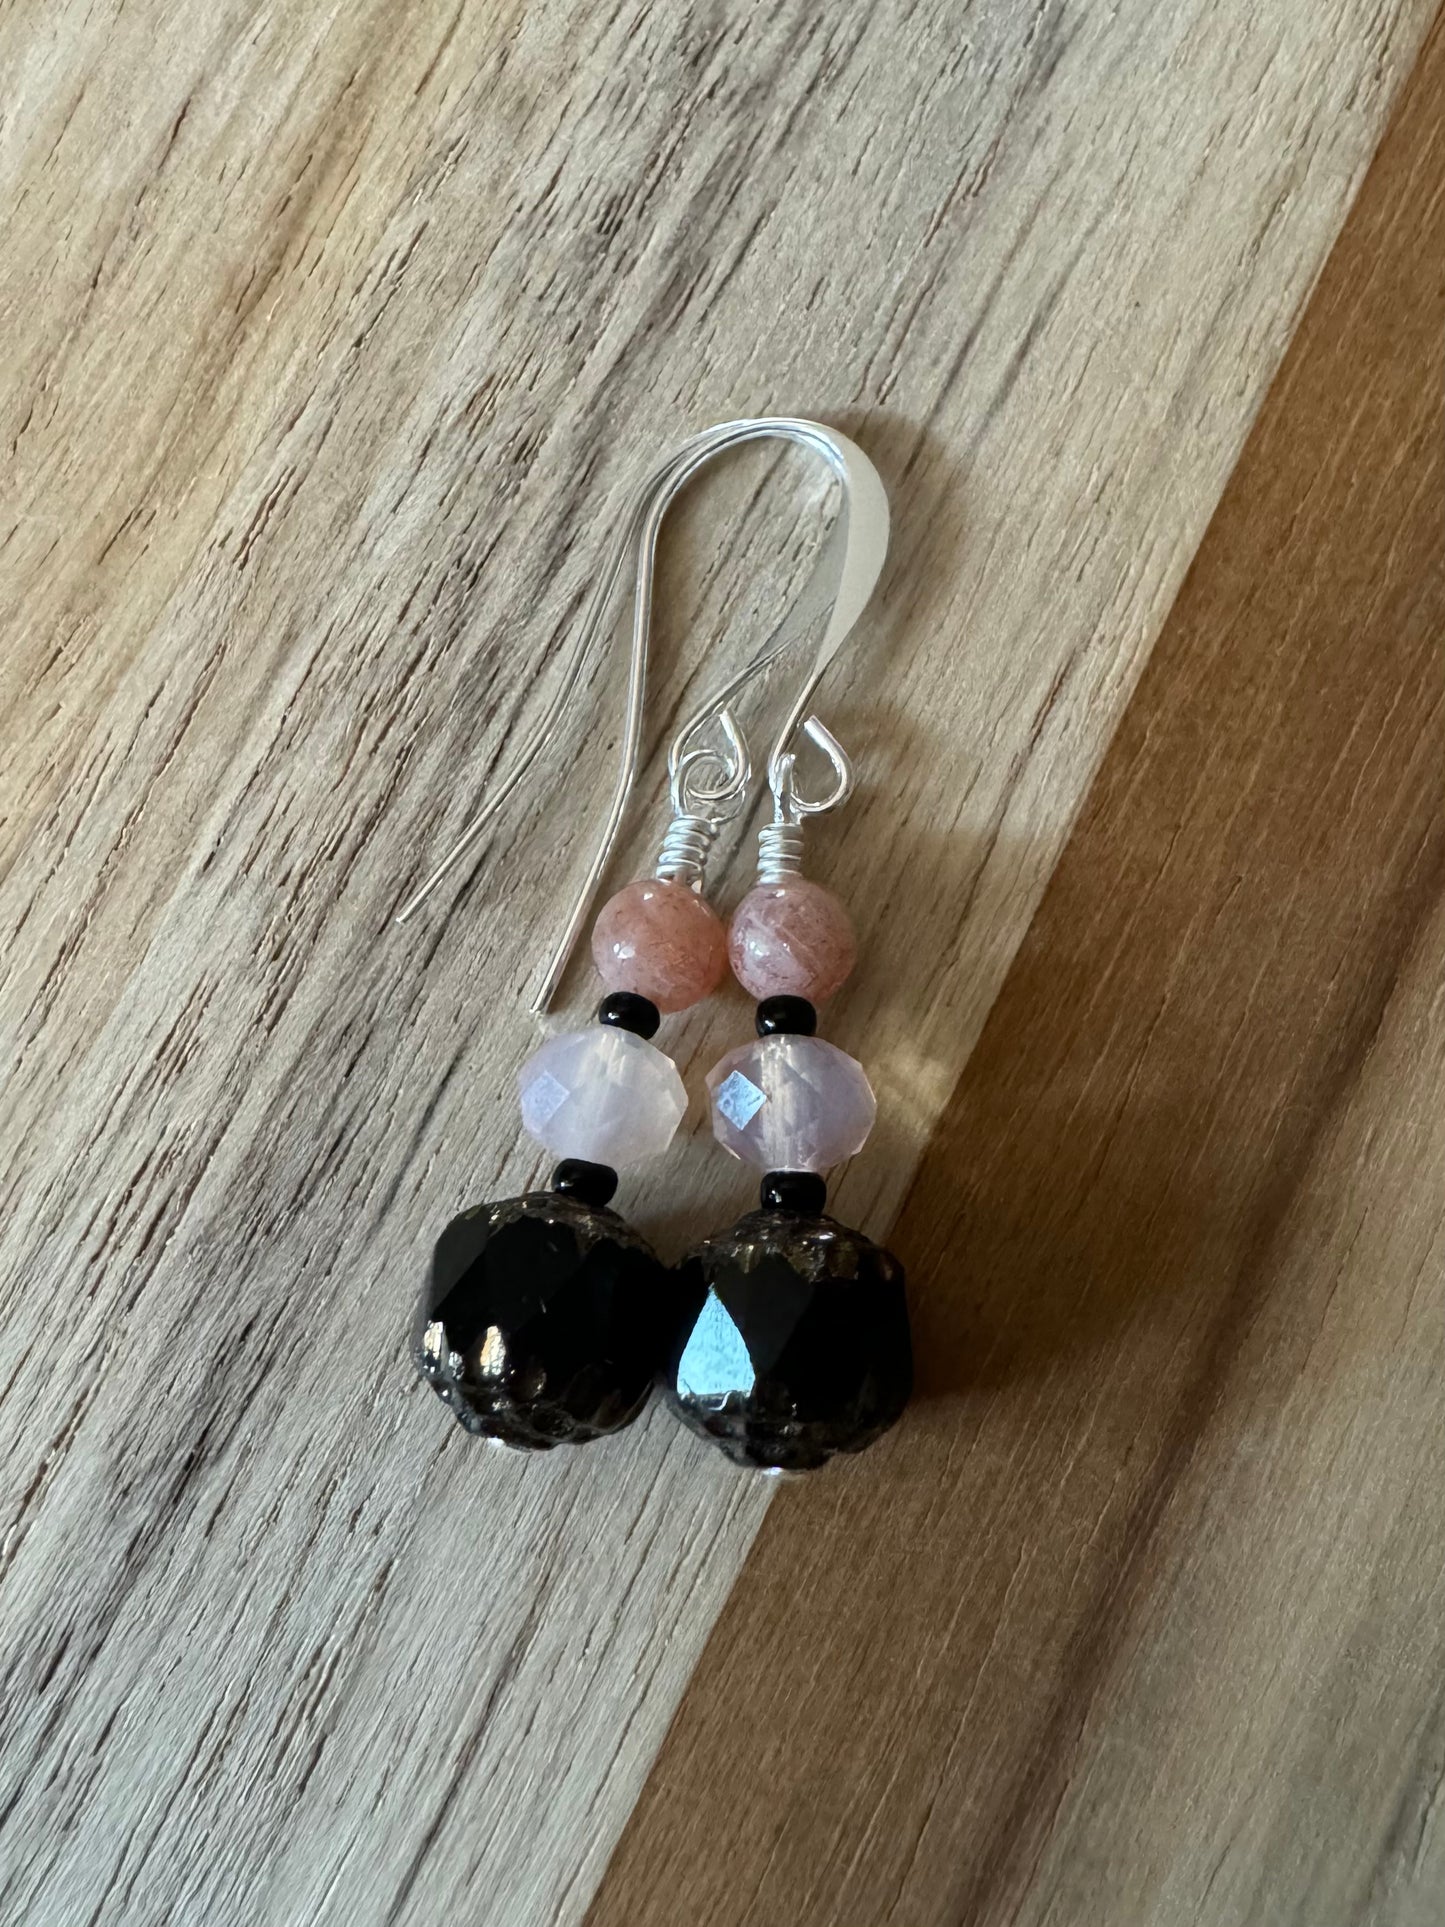 Black Czech Glass Dangle Earrings with Pink Crystal and Peach Strawberry Quartz Beads - My Urban Gems